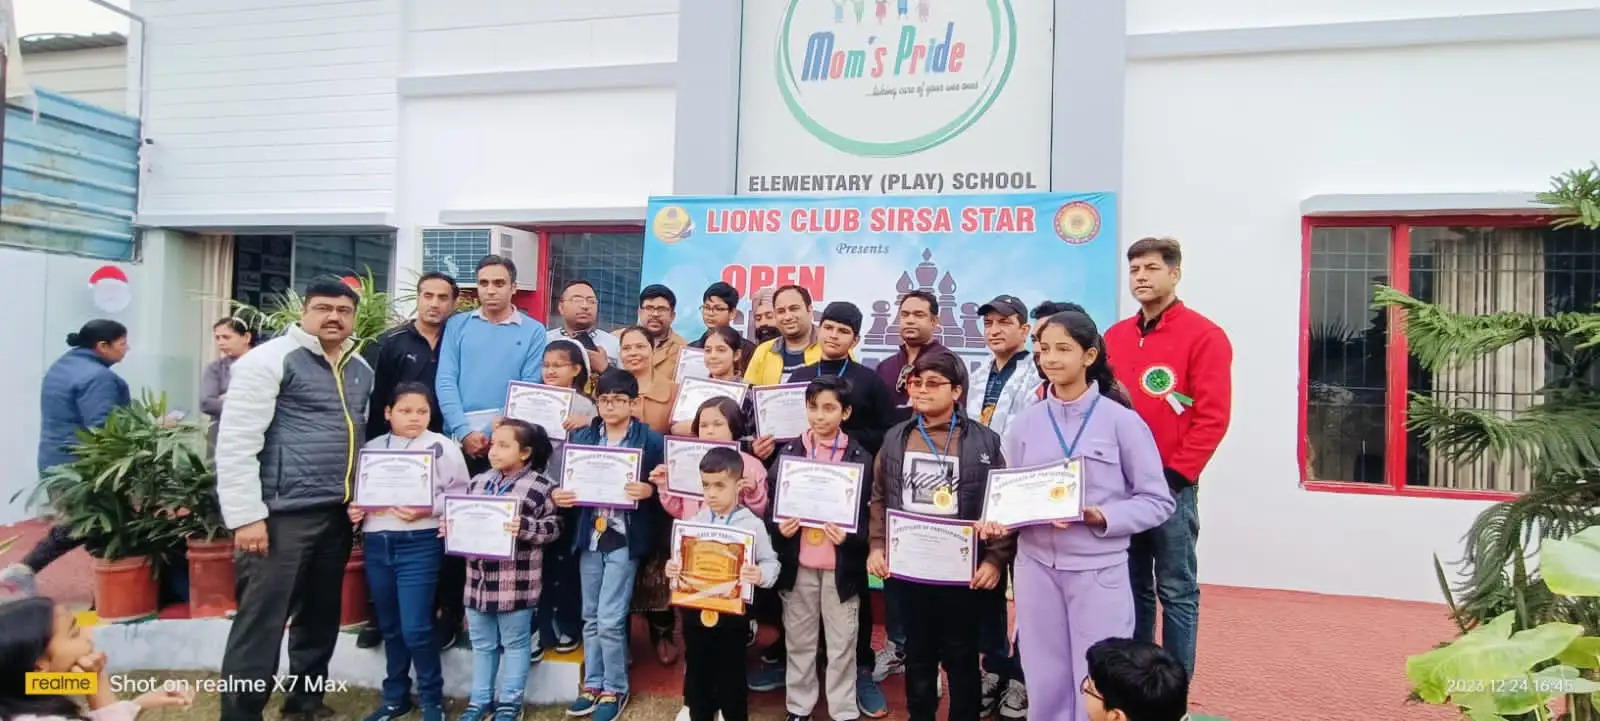 Checkmate game held in Sirsa, 75 participants took part